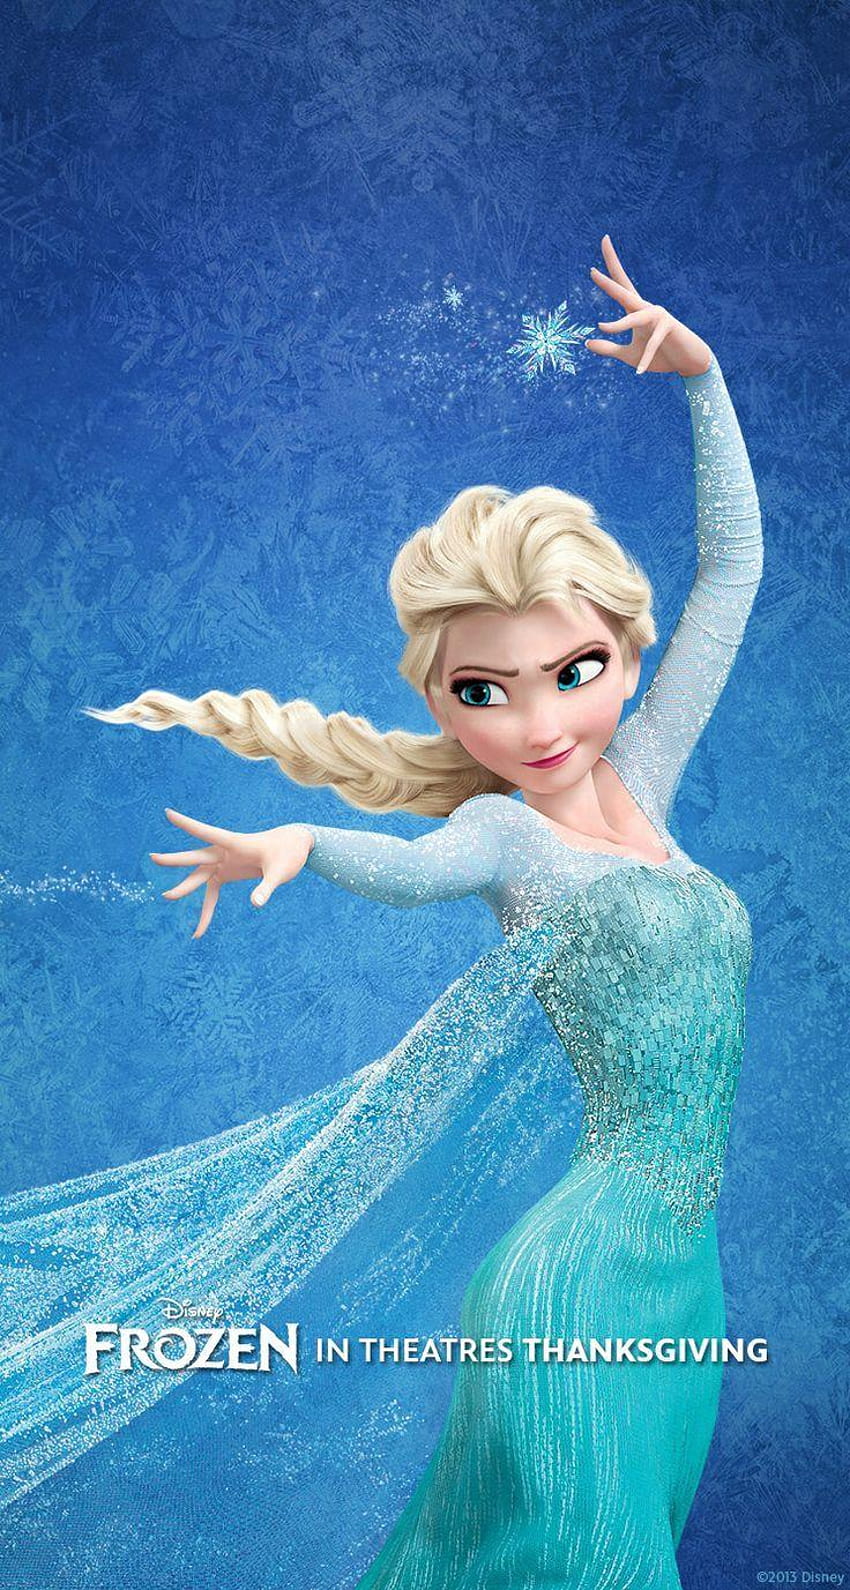 Incredible Collection Of Disney Frozen Images In Full 4k Over 999 Stunning Pictures